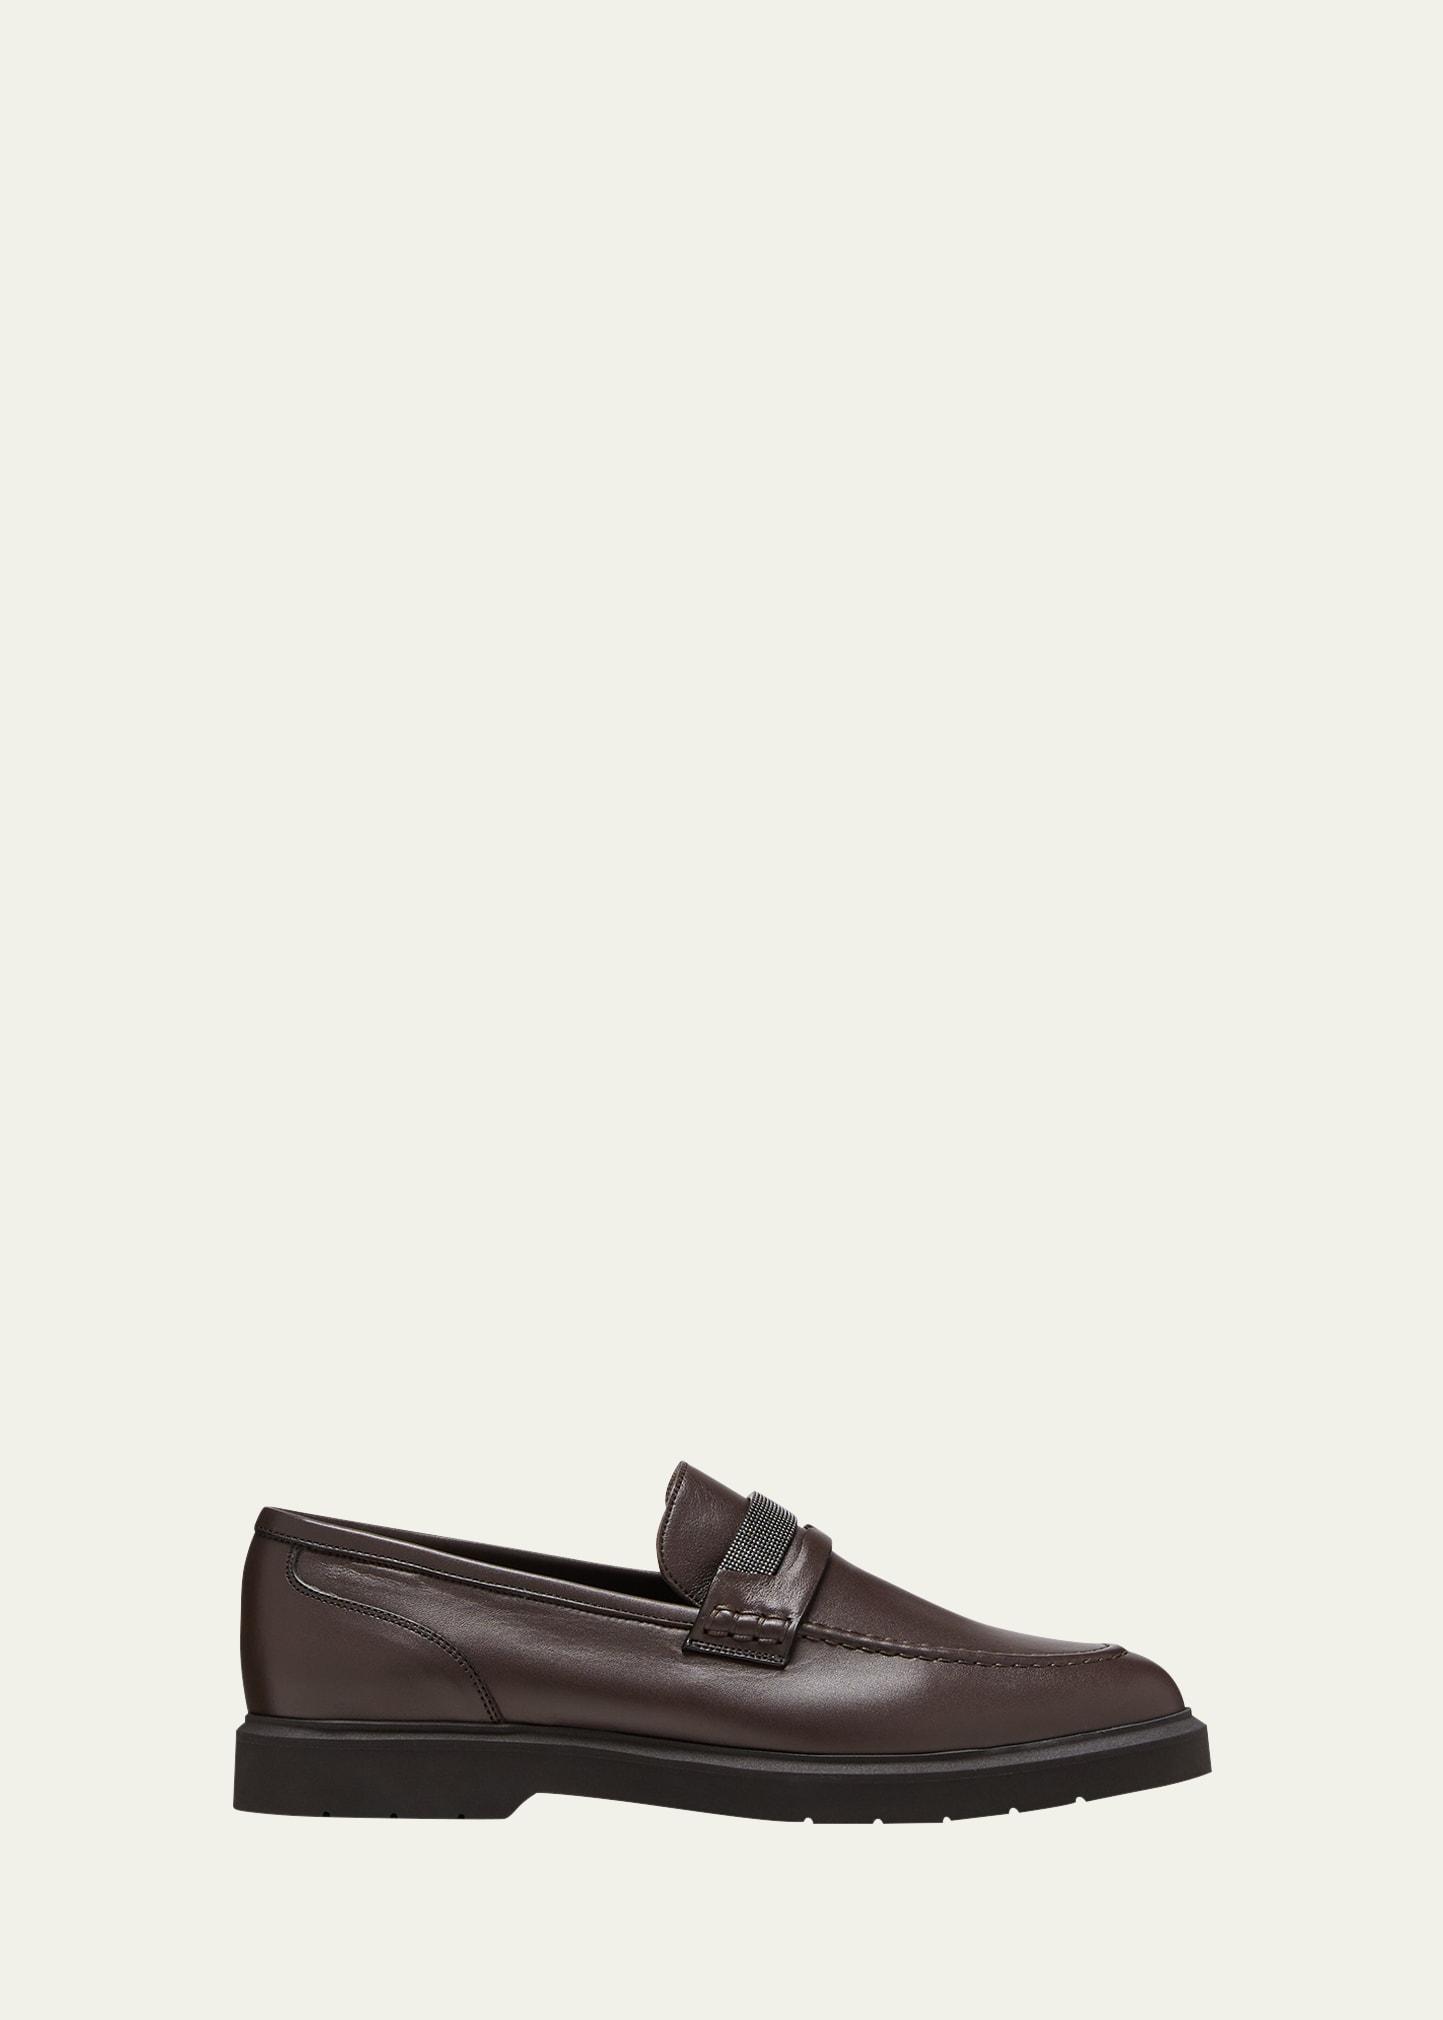 Leather Monili Penny Loafers Product Image